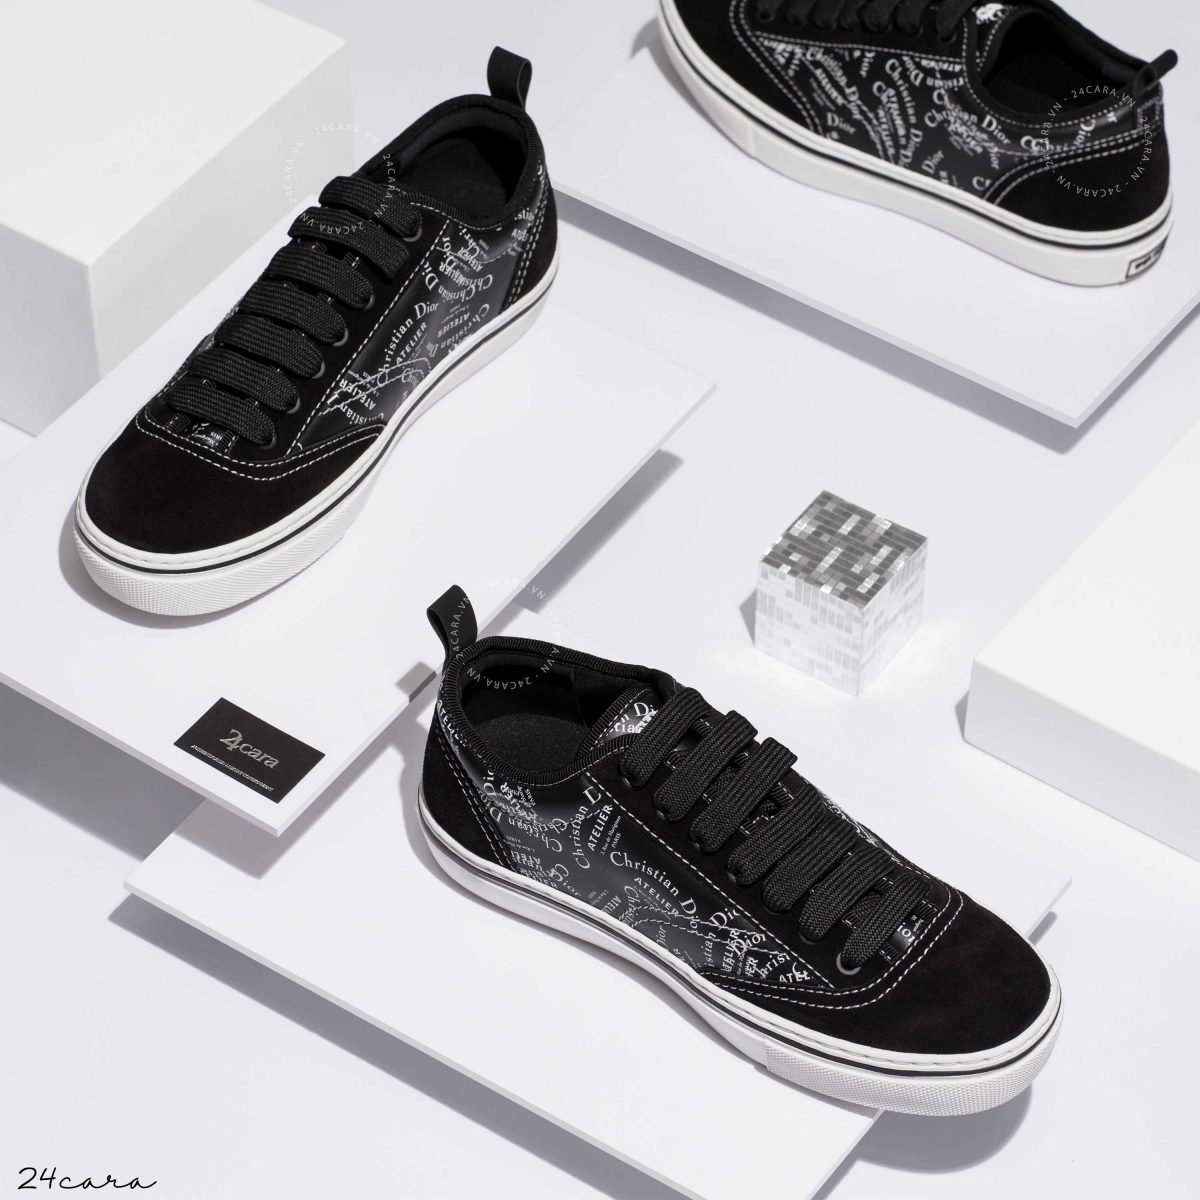 CHRISTIAN DIOR EMBROIDERED SNEAKER